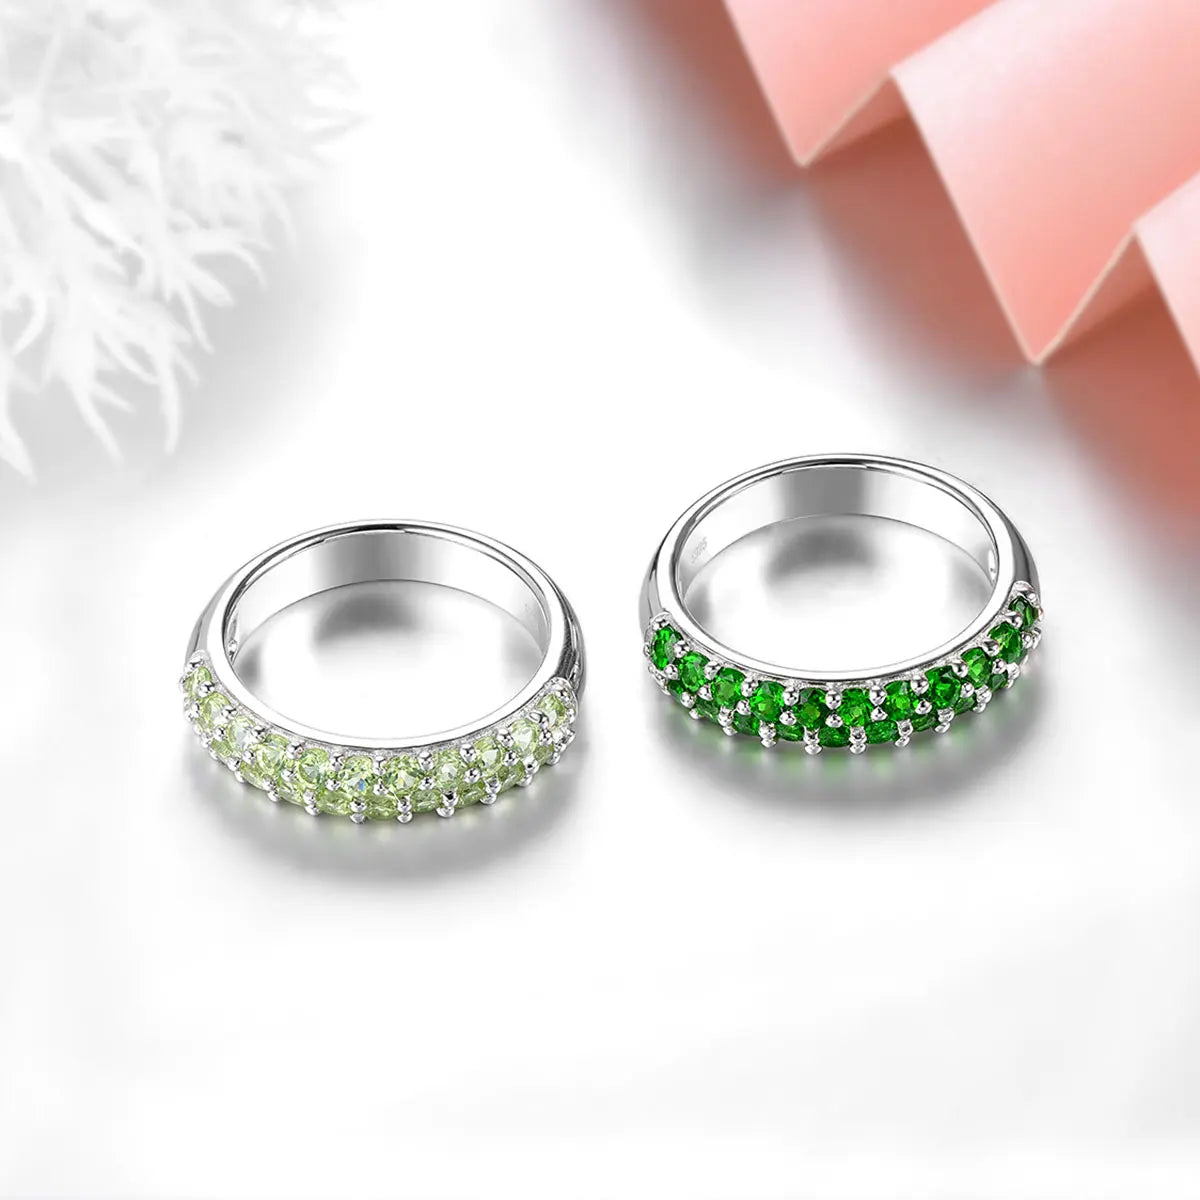 Natural Chrome Diopside Sterling Silver Rings 1 Carats Genuine Gemstone Women Classic Jewelry Style Top Quality Birthday Gifts